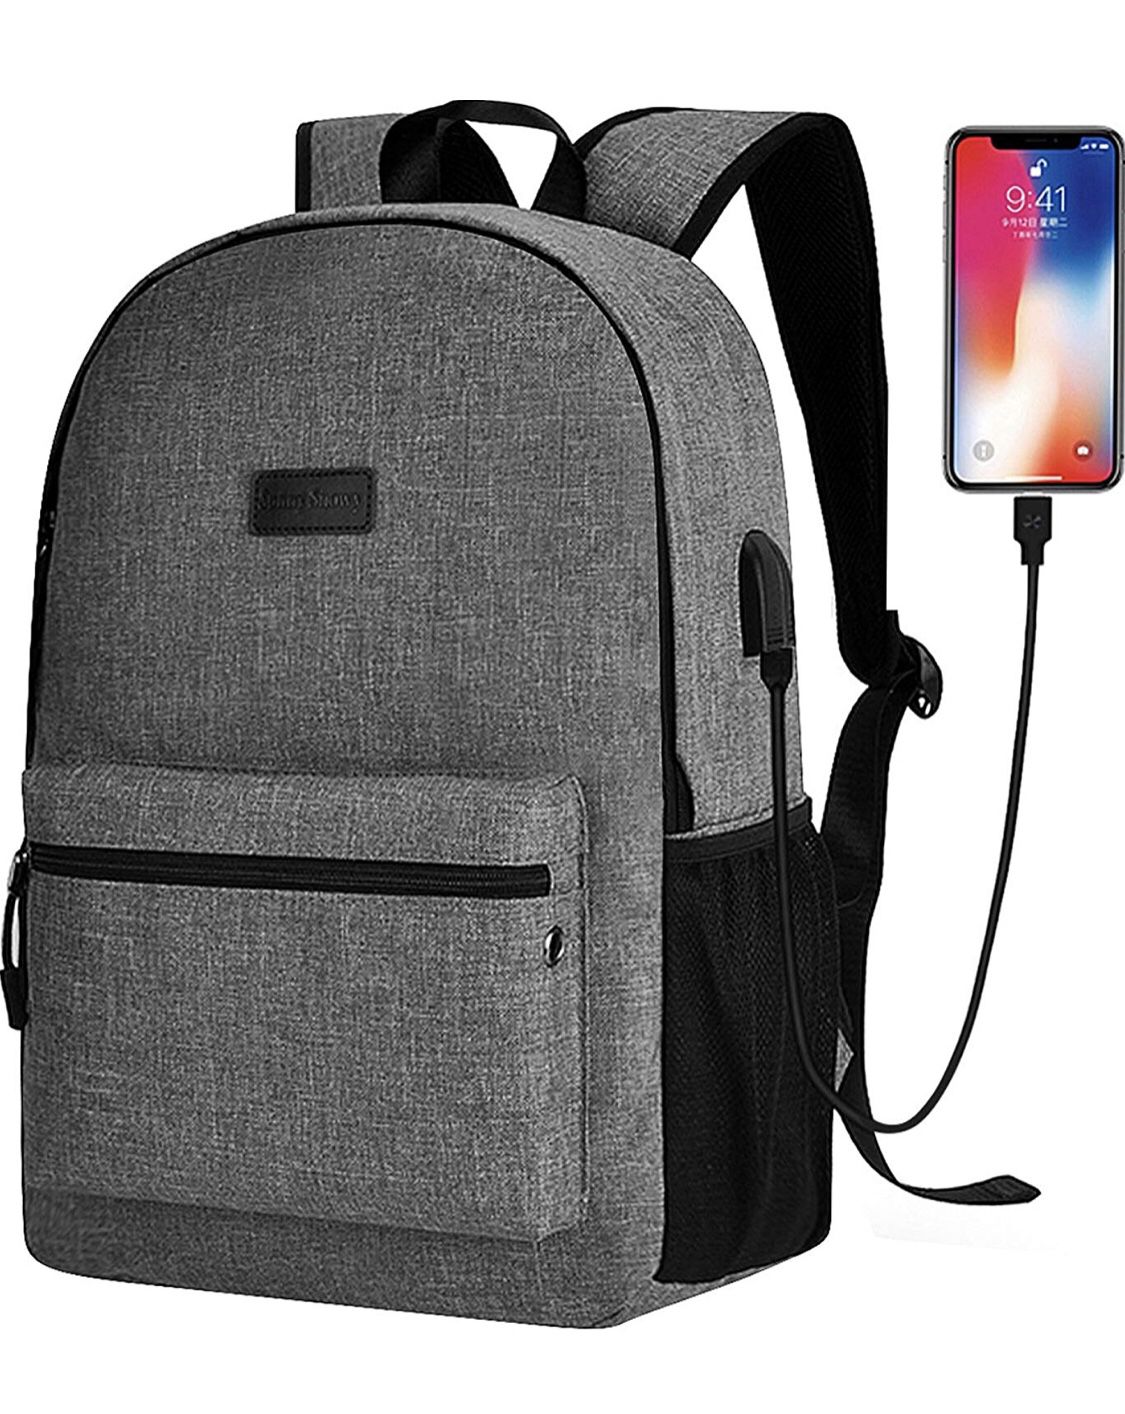 Brand-new Laptop Backpack for Women Men,Travel School Backpack Up to 15.6 Inch with USB Port